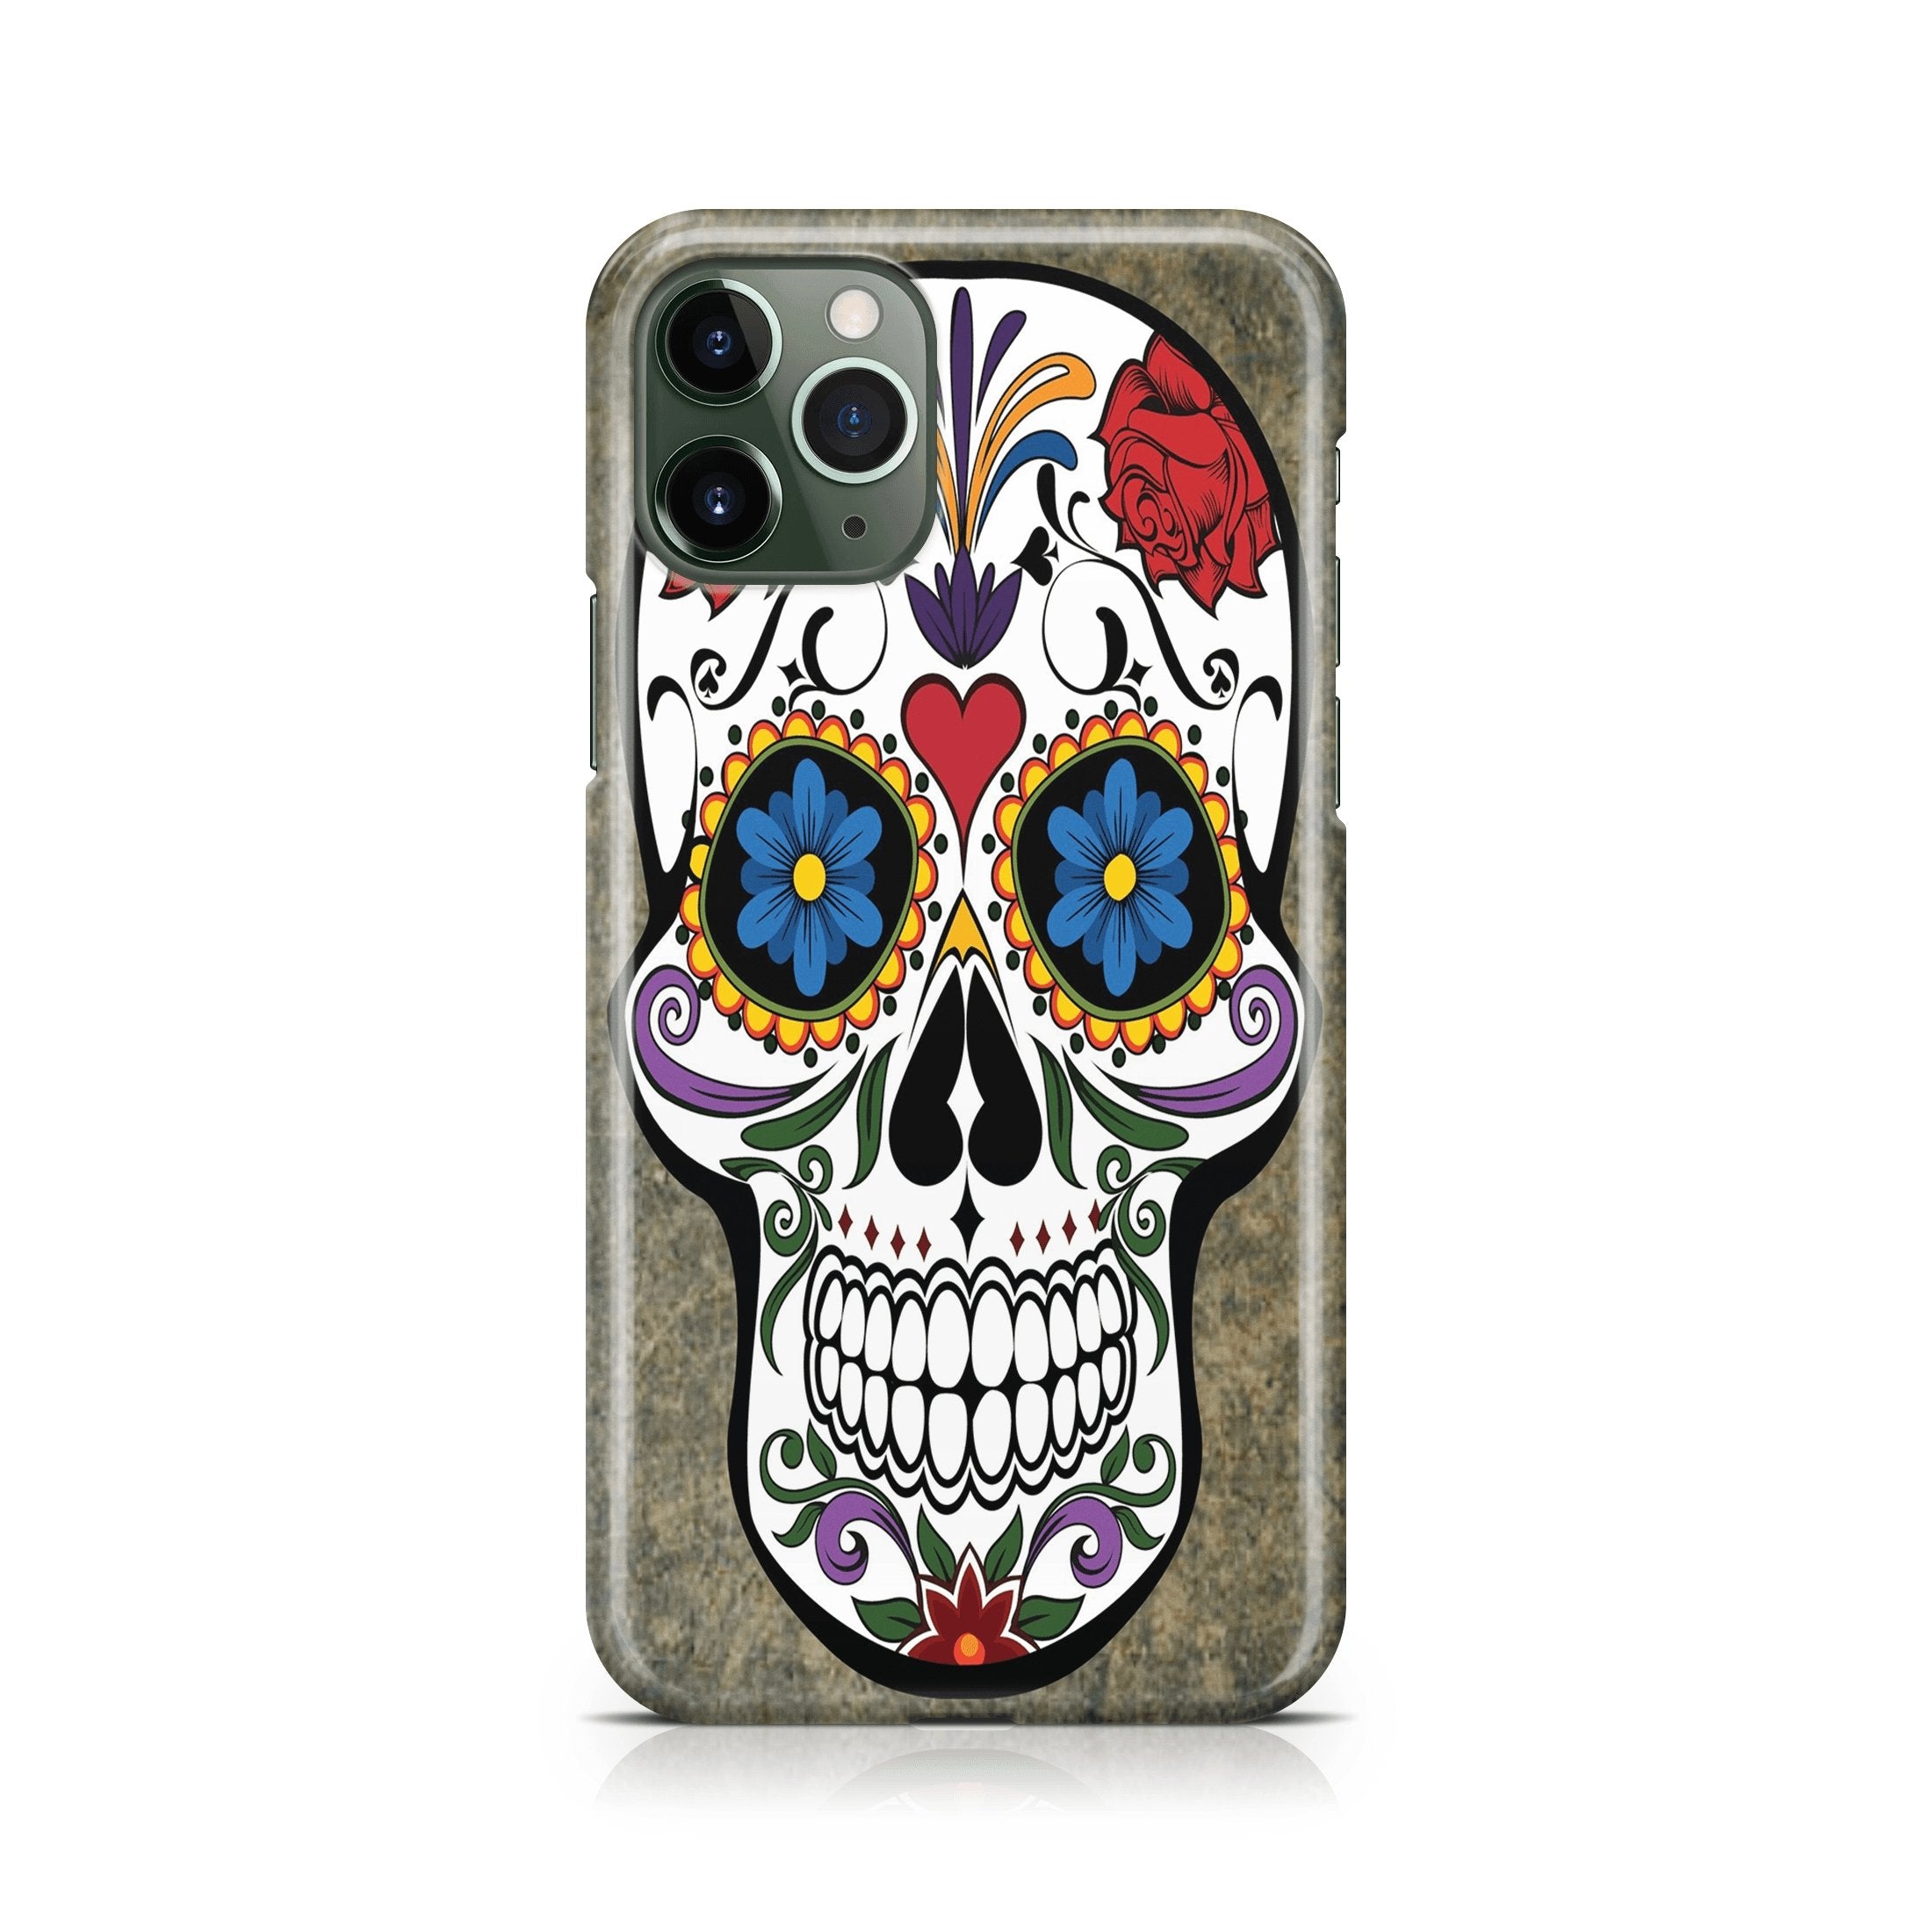 Voodoo Lover - iPhone phone case designs by CaseSwagger